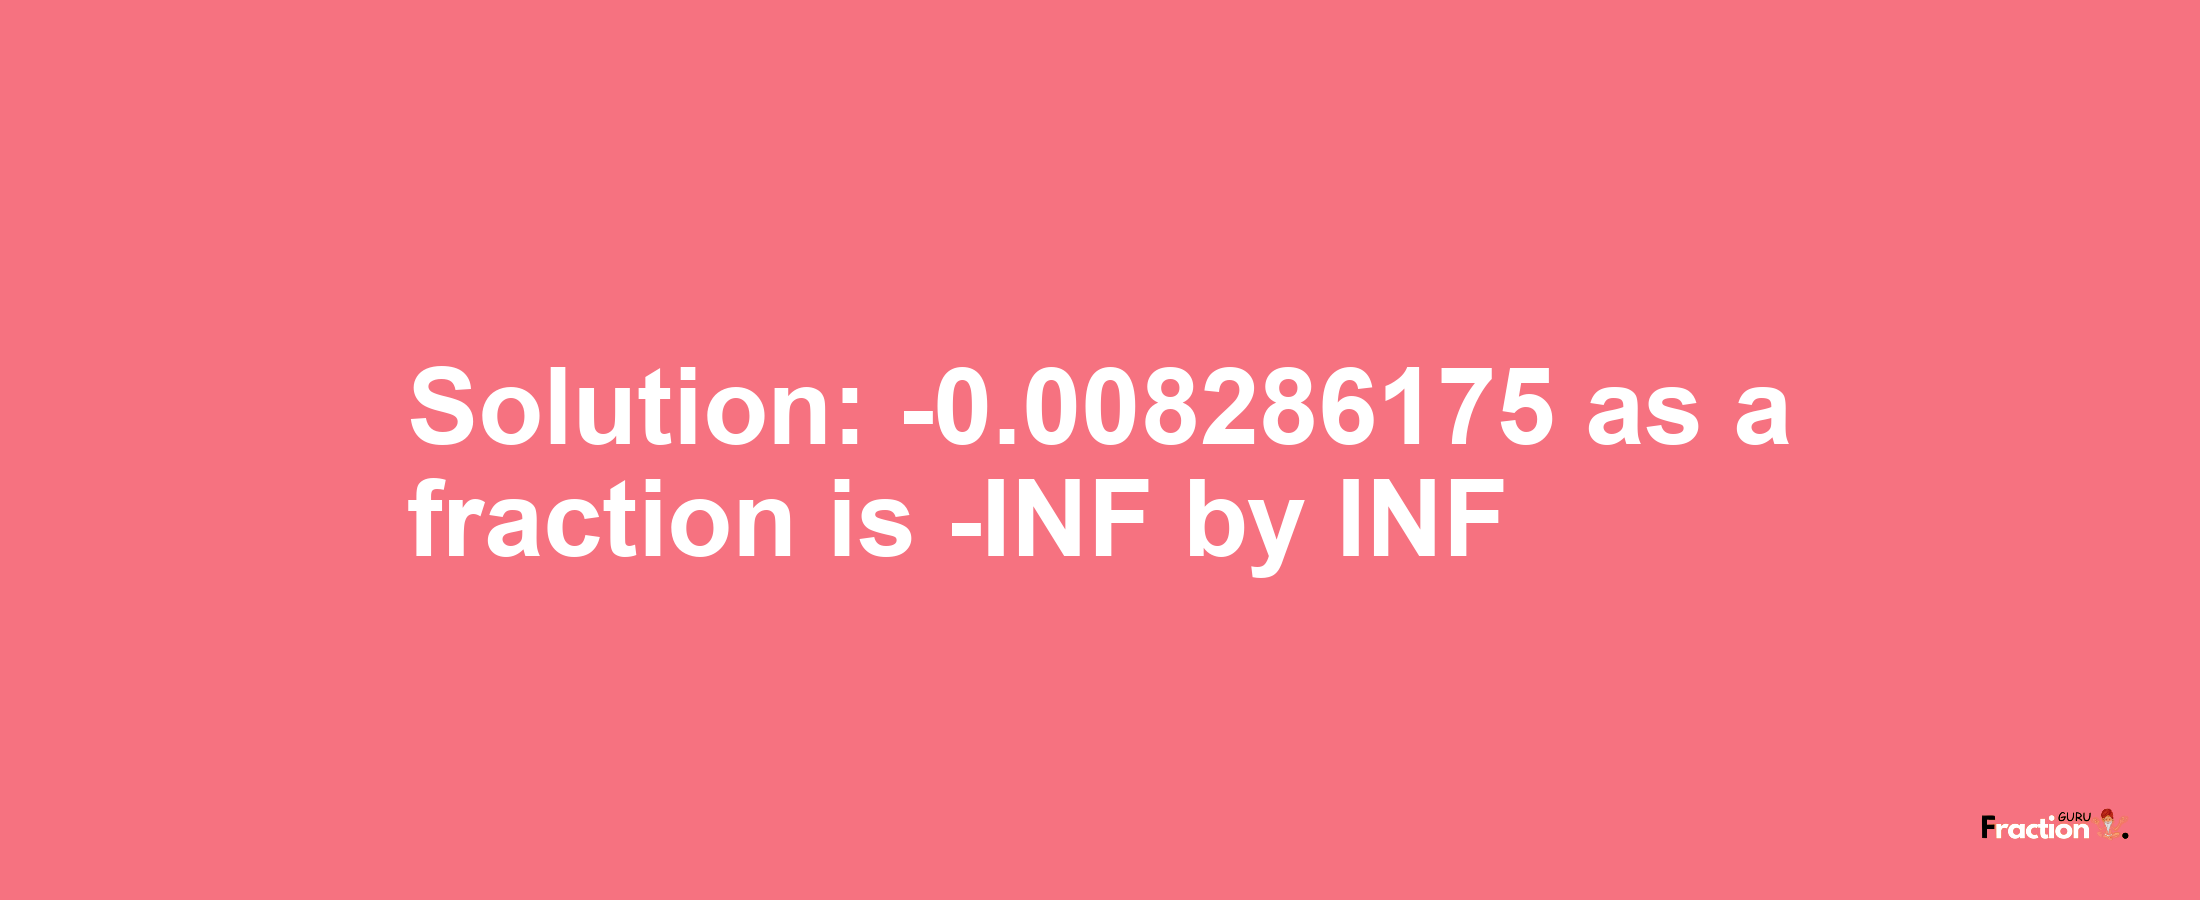 Solution:-0.008286175 as a fraction is -INF/INF